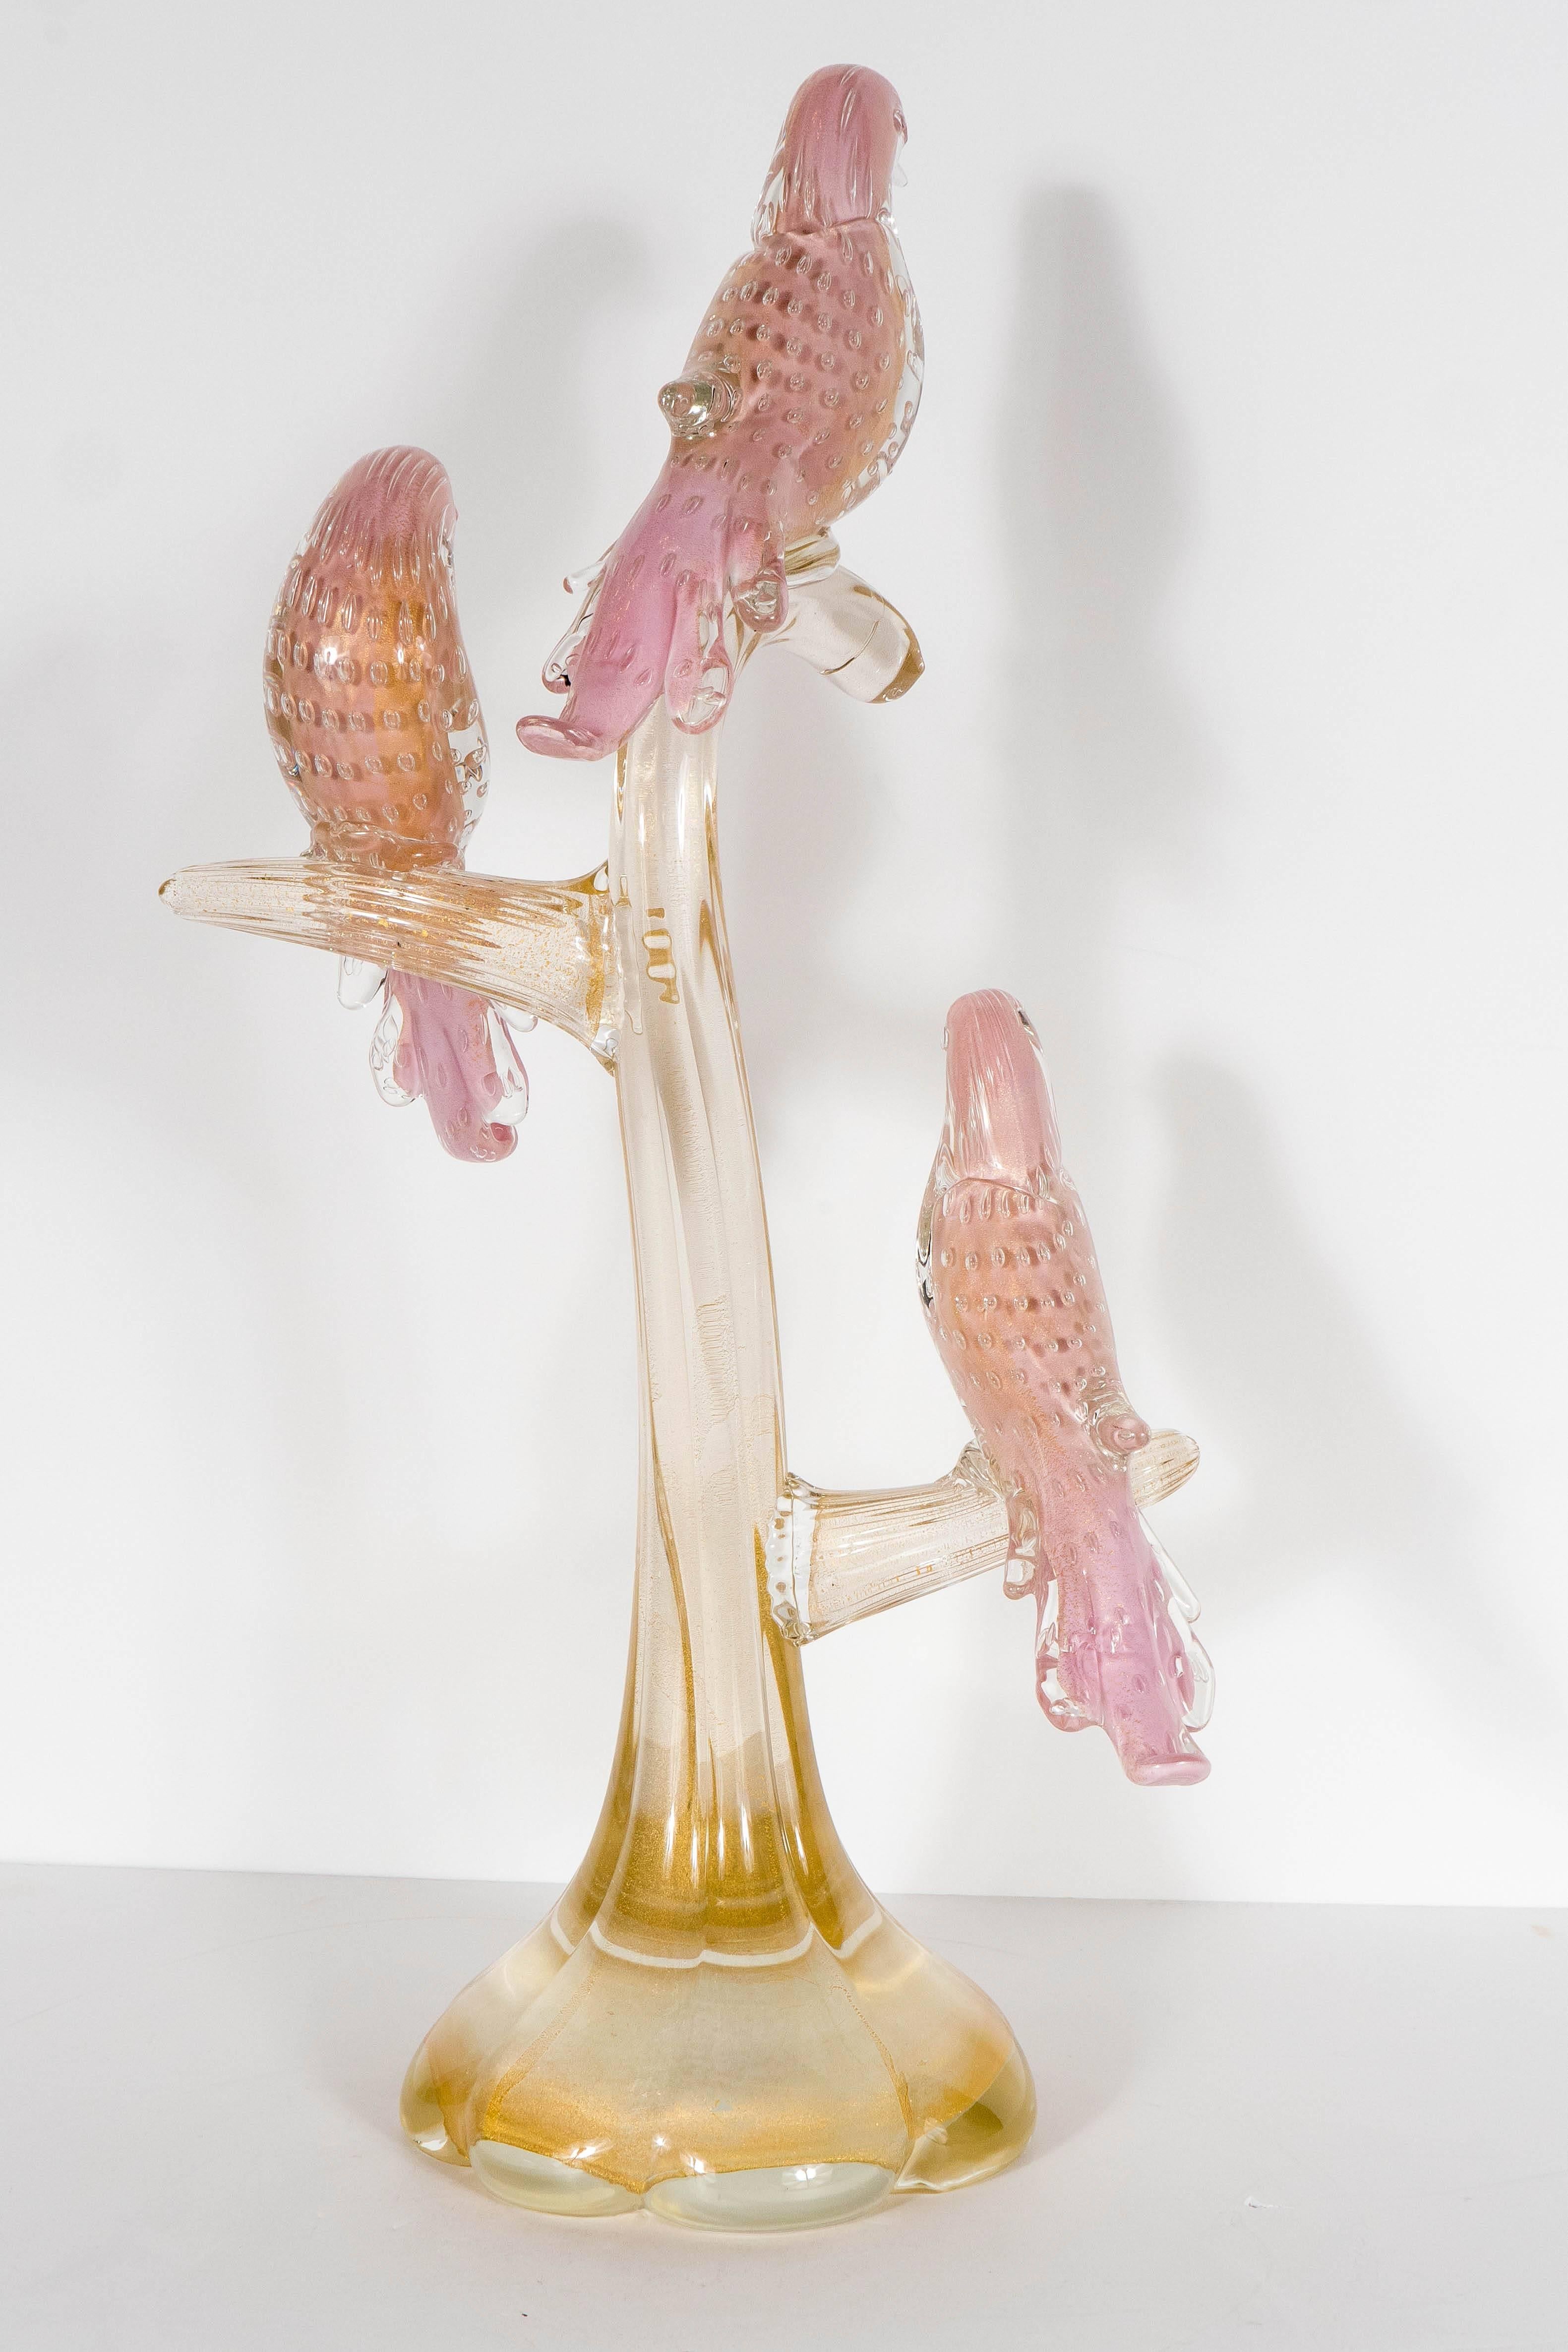 Mid-20th Century Midcentury Murano Glass Sculpture of Three Birds on a Branch